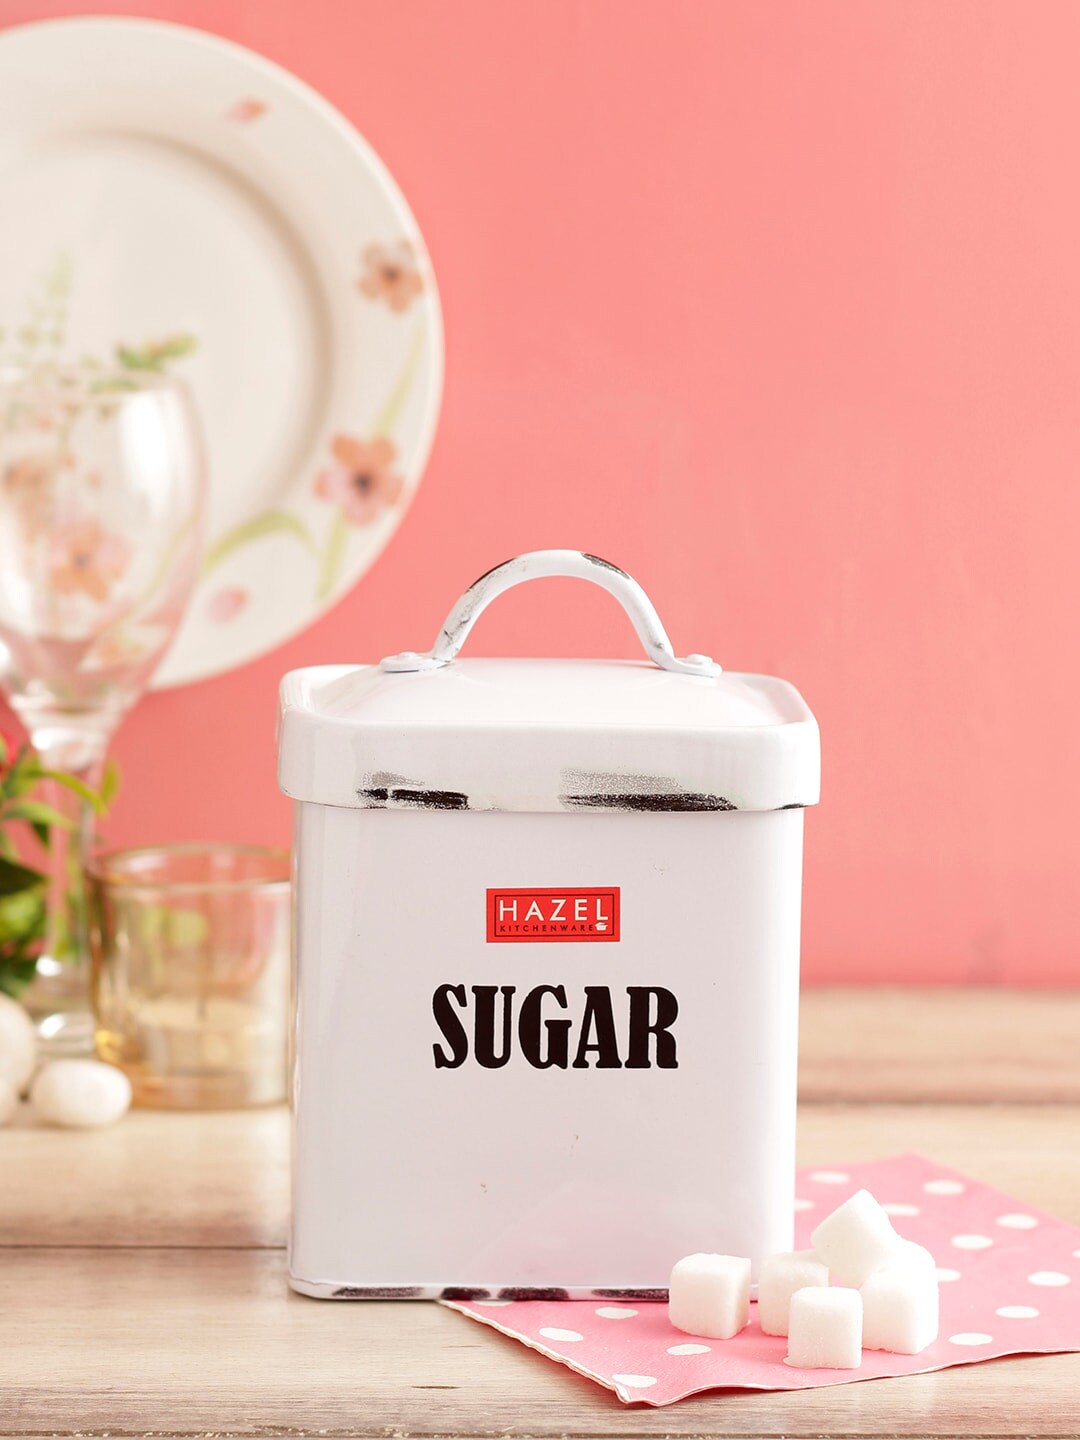 HAZEL White Antique Rectangle Sugar Storage Canister Container With Handle Price in India